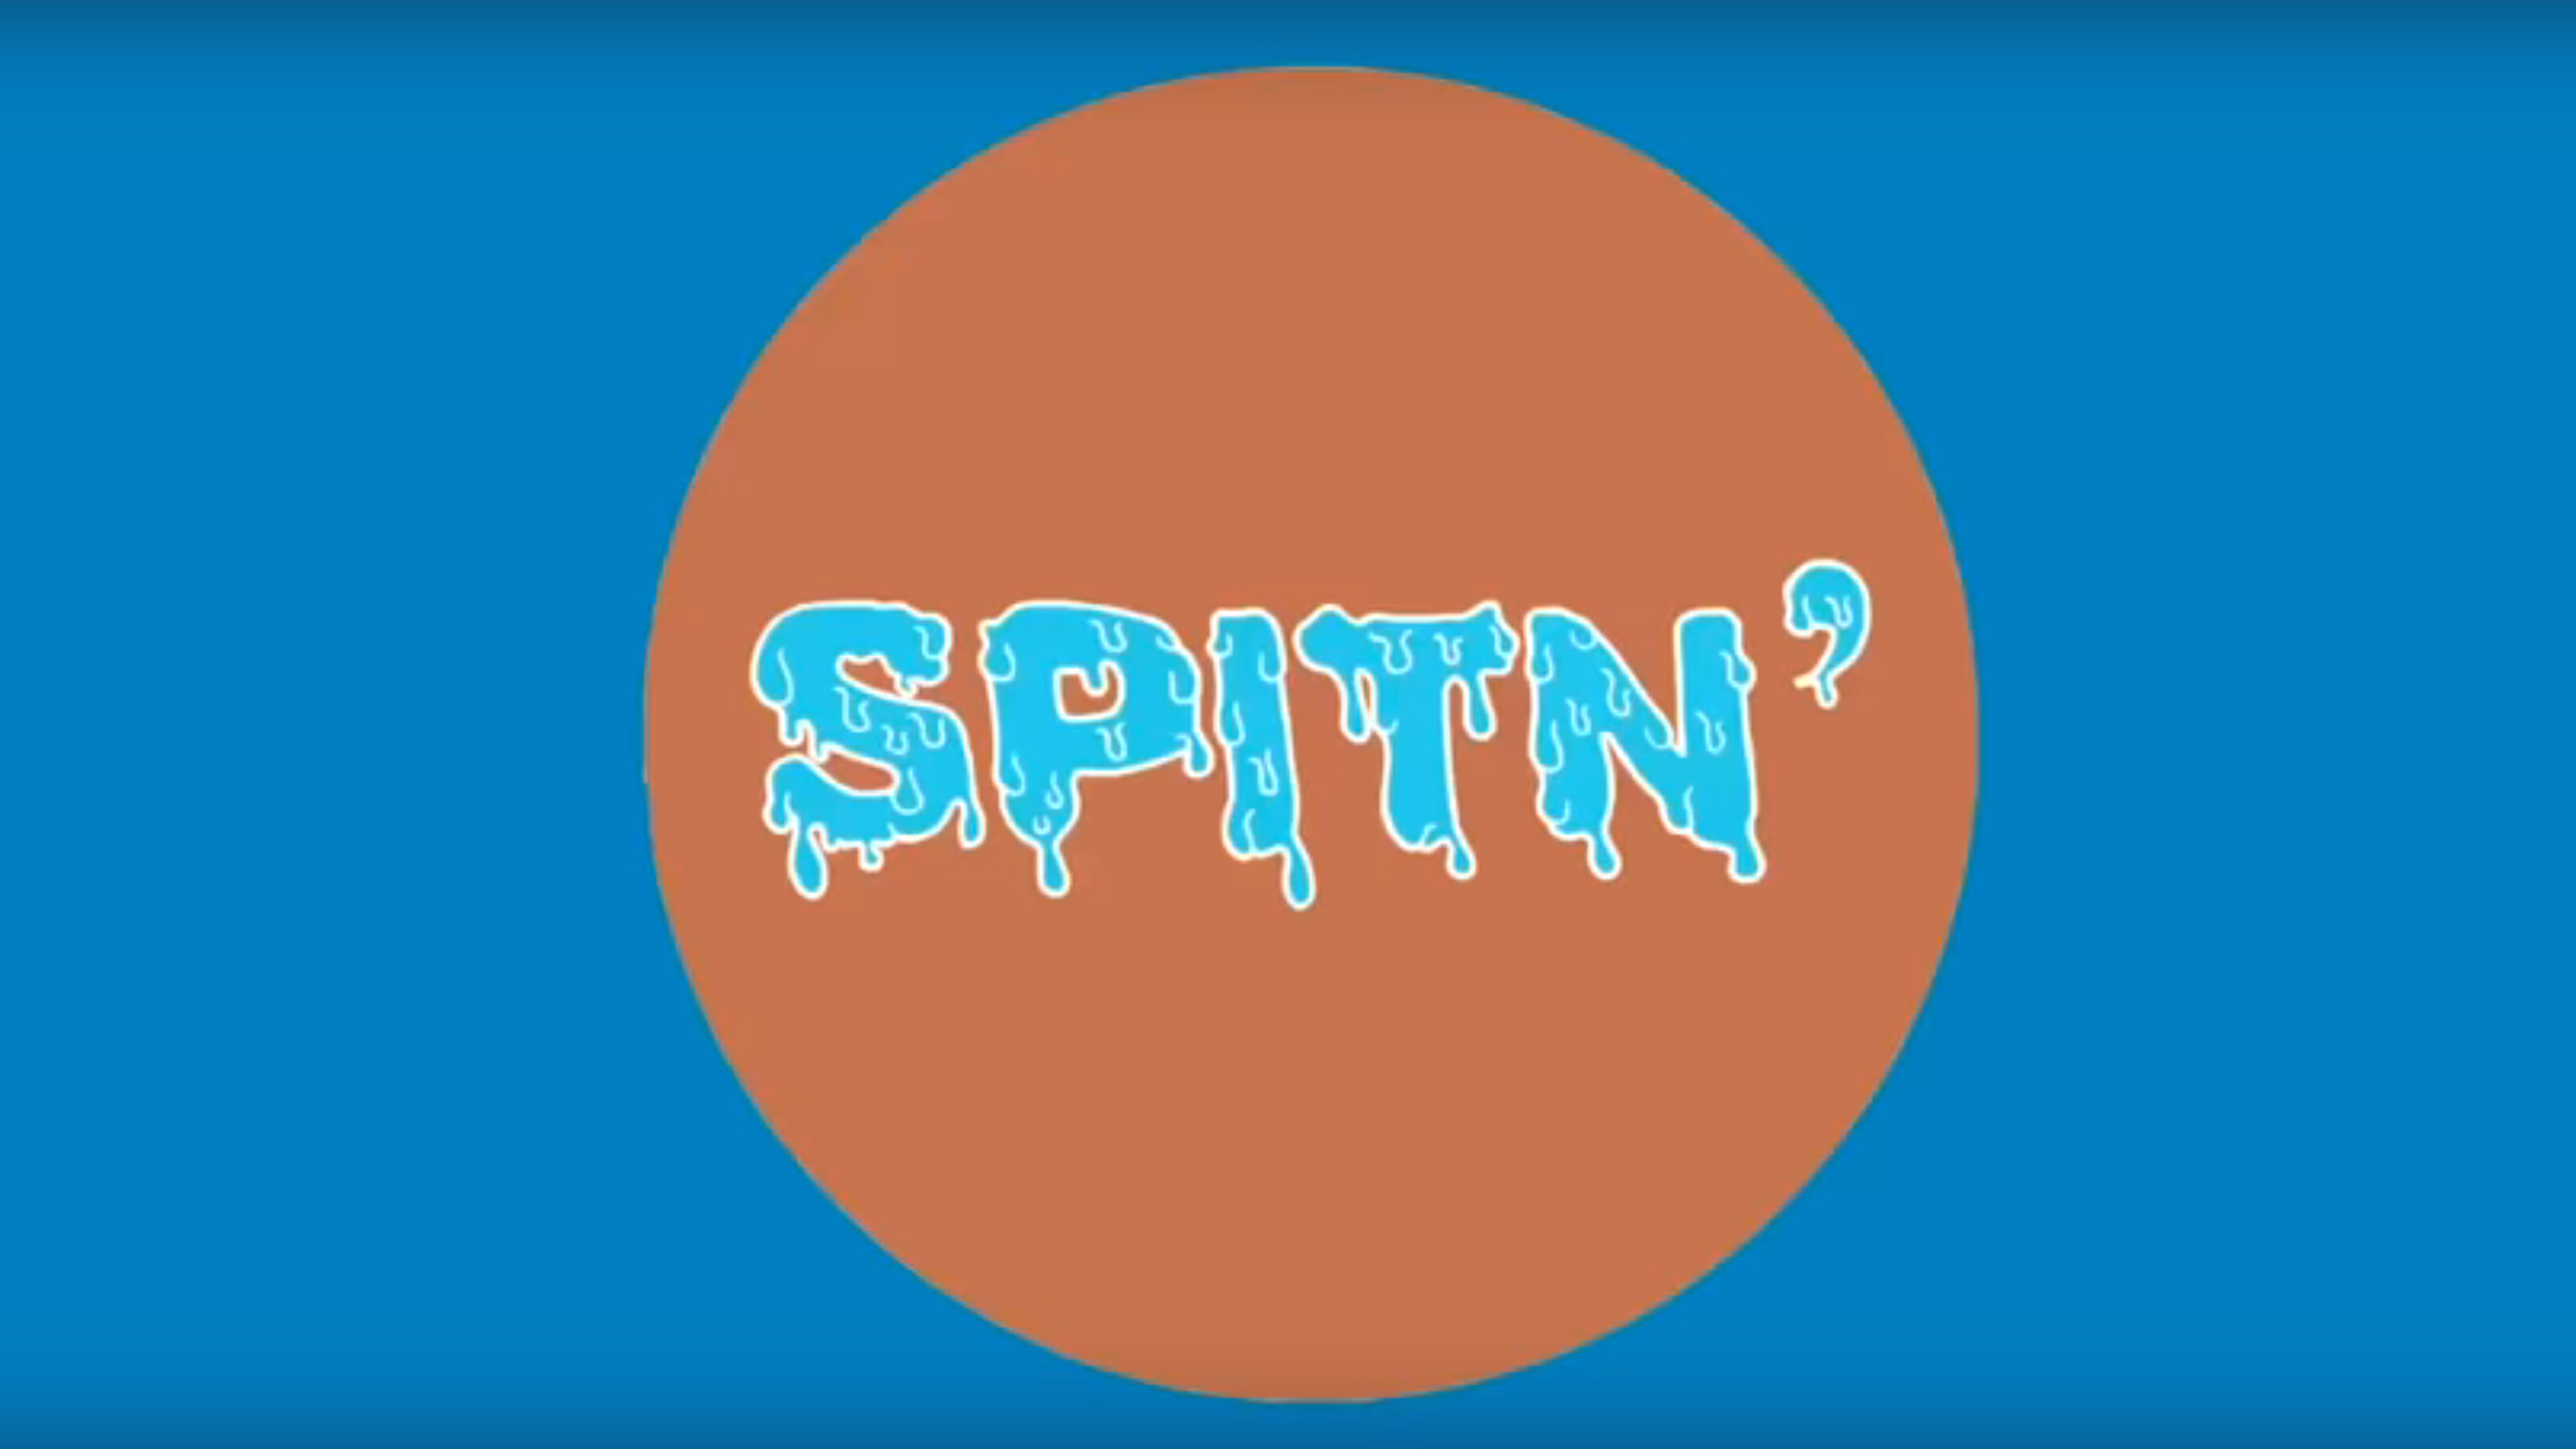 An image of an orange circle on a blue background. Inside the circle is the text "spiting".